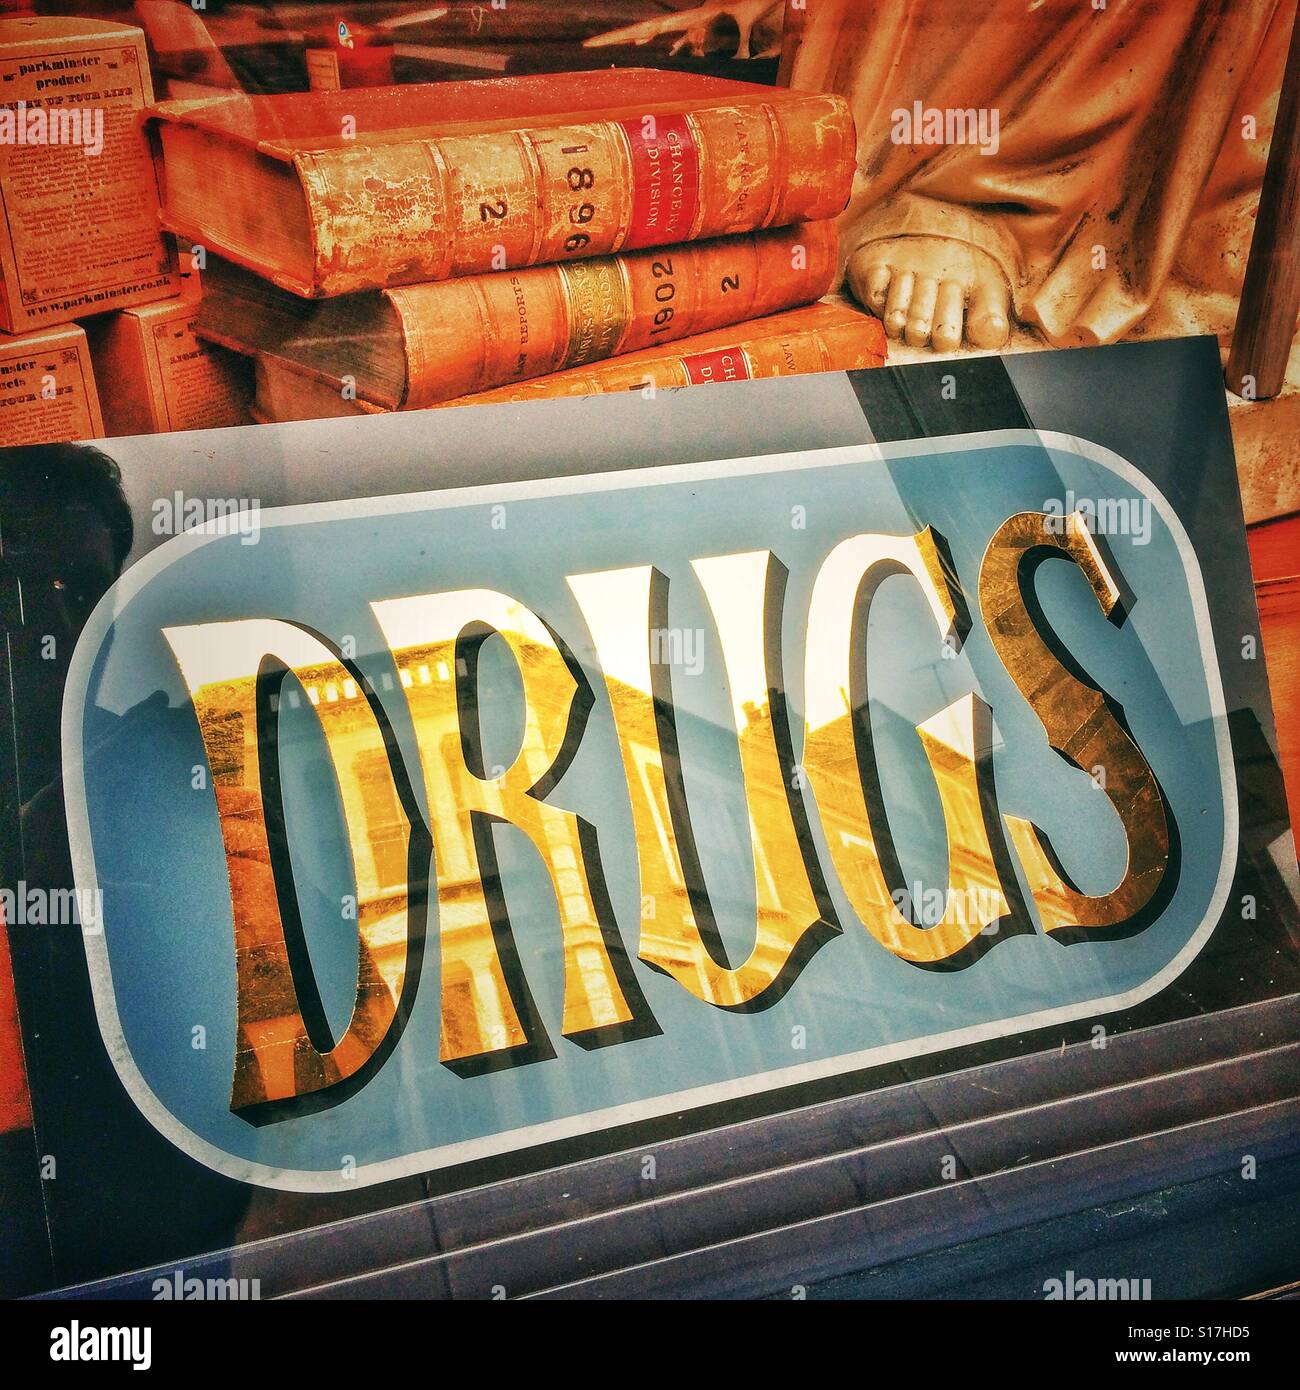 A drugs sign in a shop window Stock Photo